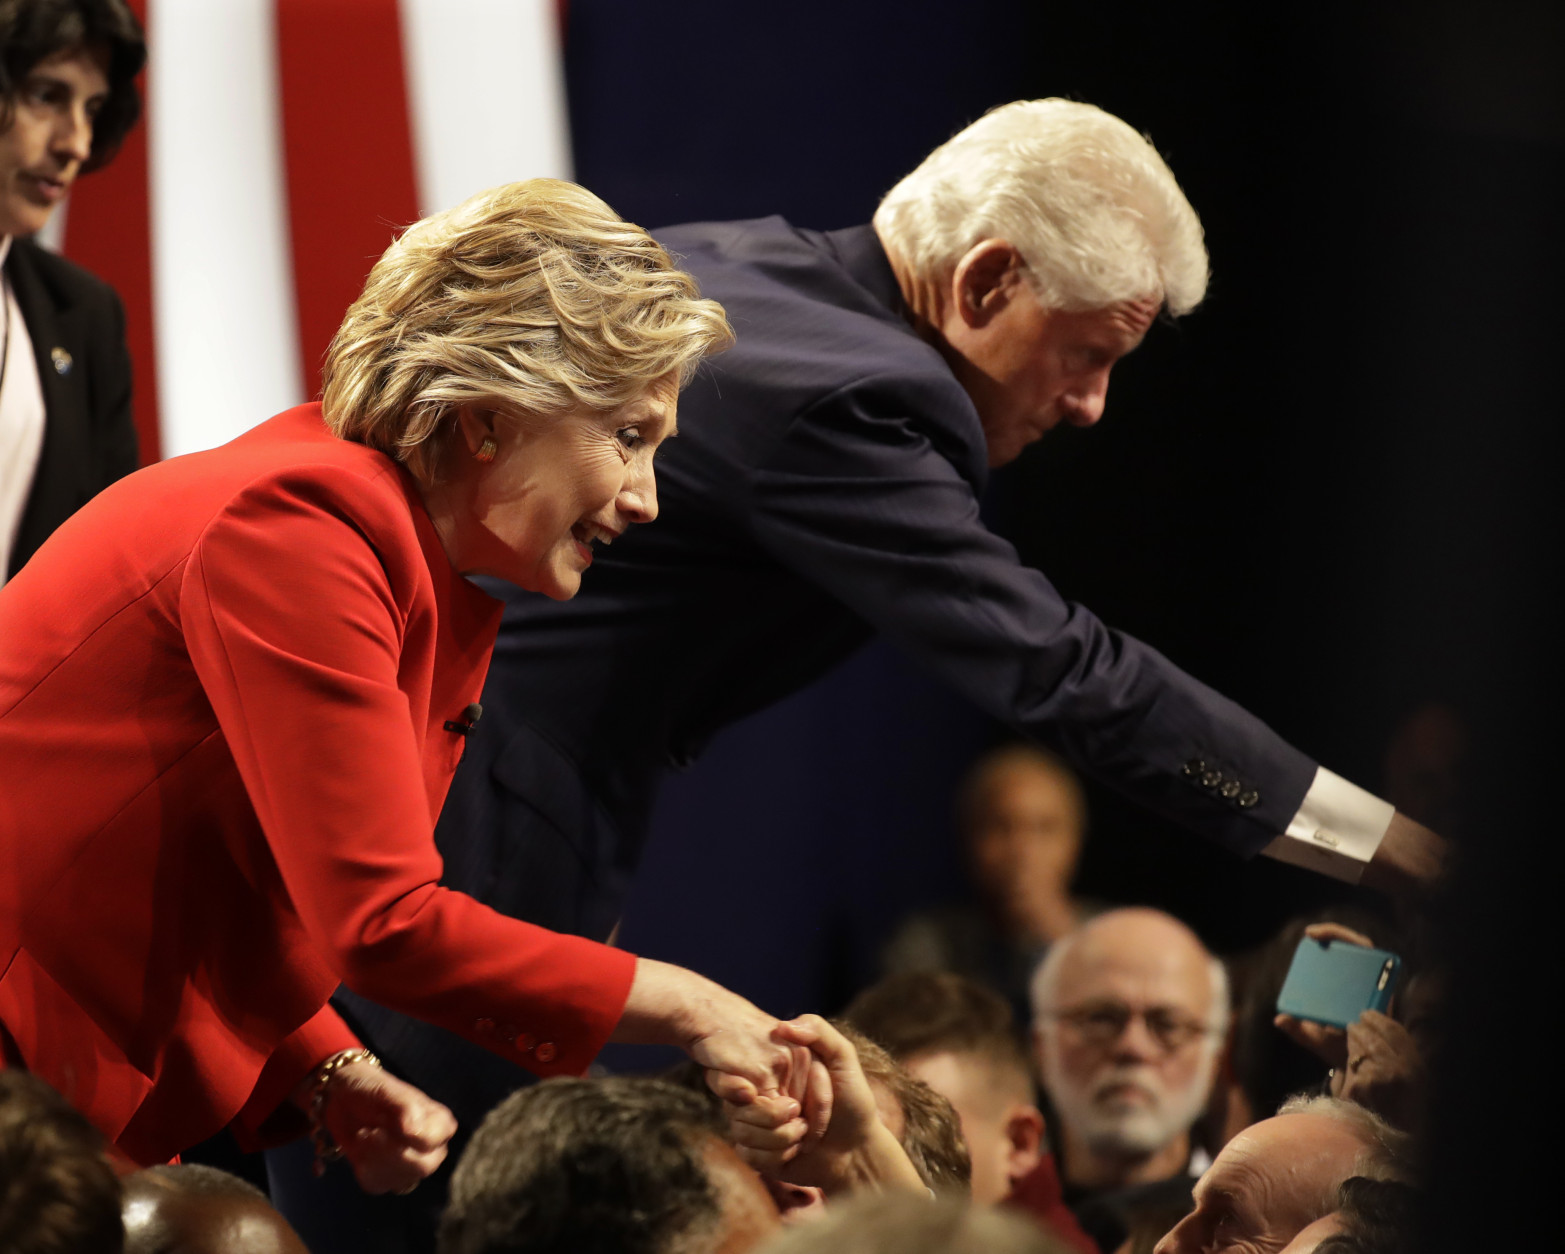 Democratic presidential nominee Hillary Clinton shakes hands with her husband Bill Clinton and audience members after the presidential debate with Republican presidential nominee Donald Trump at Hofstra University in Hempstead, N.Y., Monday, Sept. 26, 2016. (AP Photo/Julio Cortez)